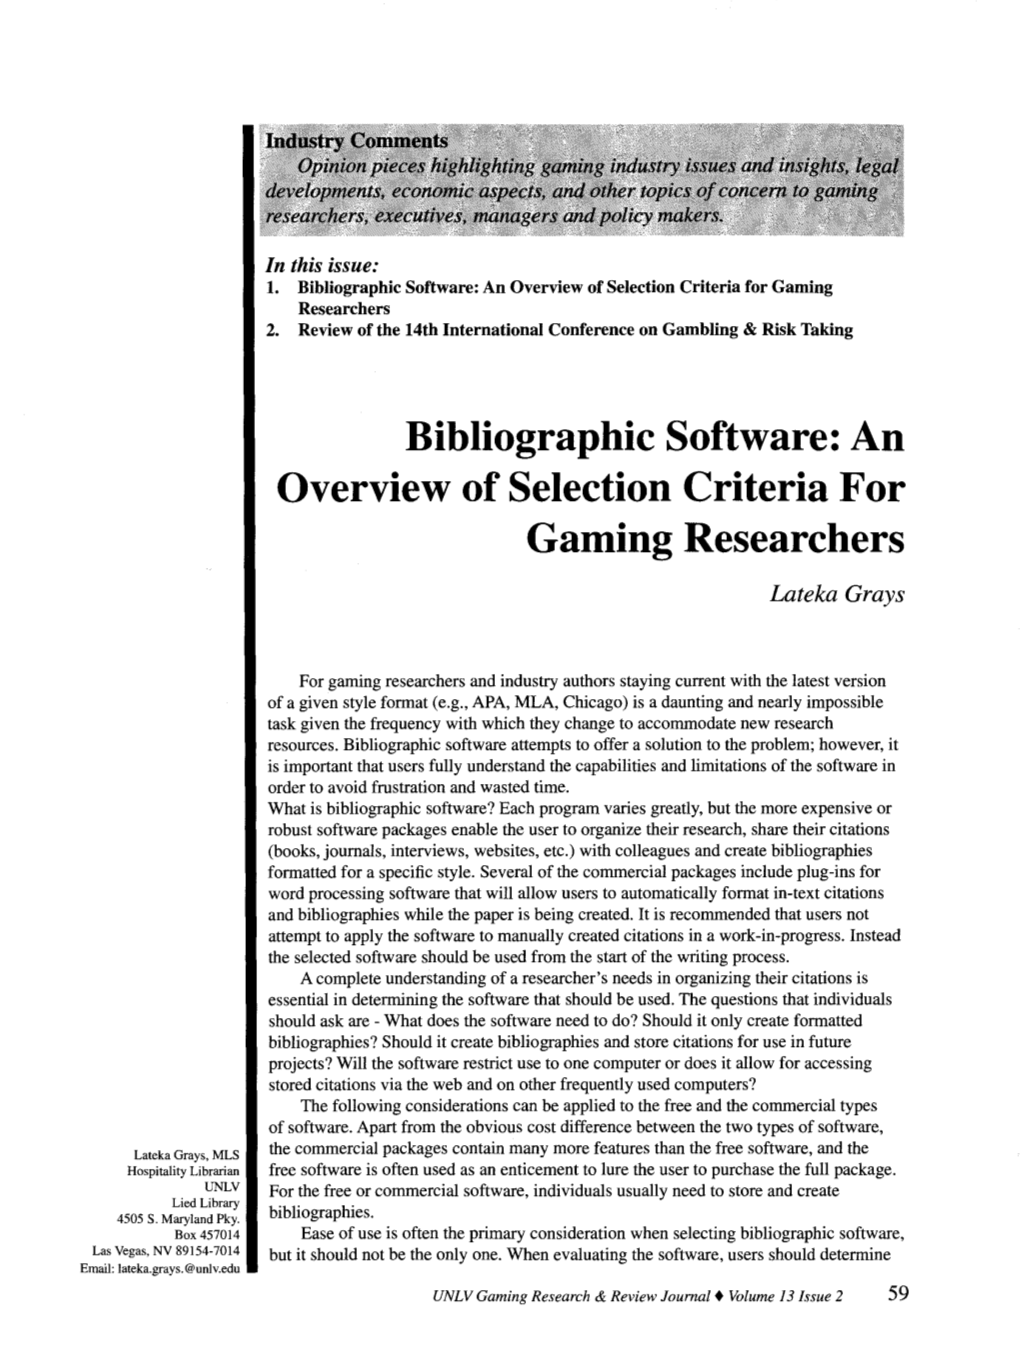 Bibliographic Software: an Overview of Selection Criteria for Gaming Researchers 2